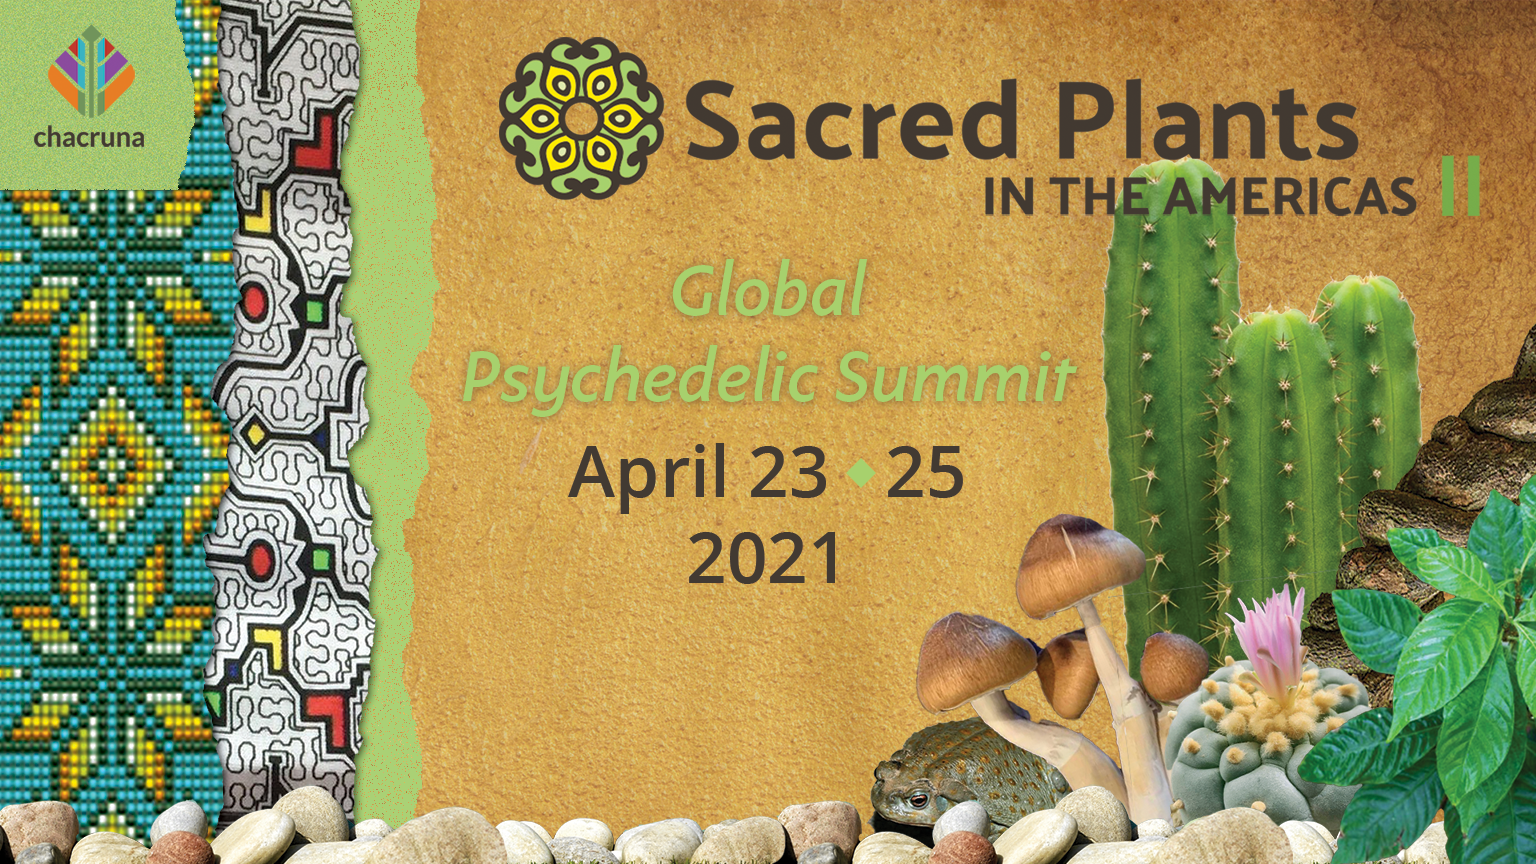 Chacruna’s Sacred Plants in the Americas II, April 23-25, 2021